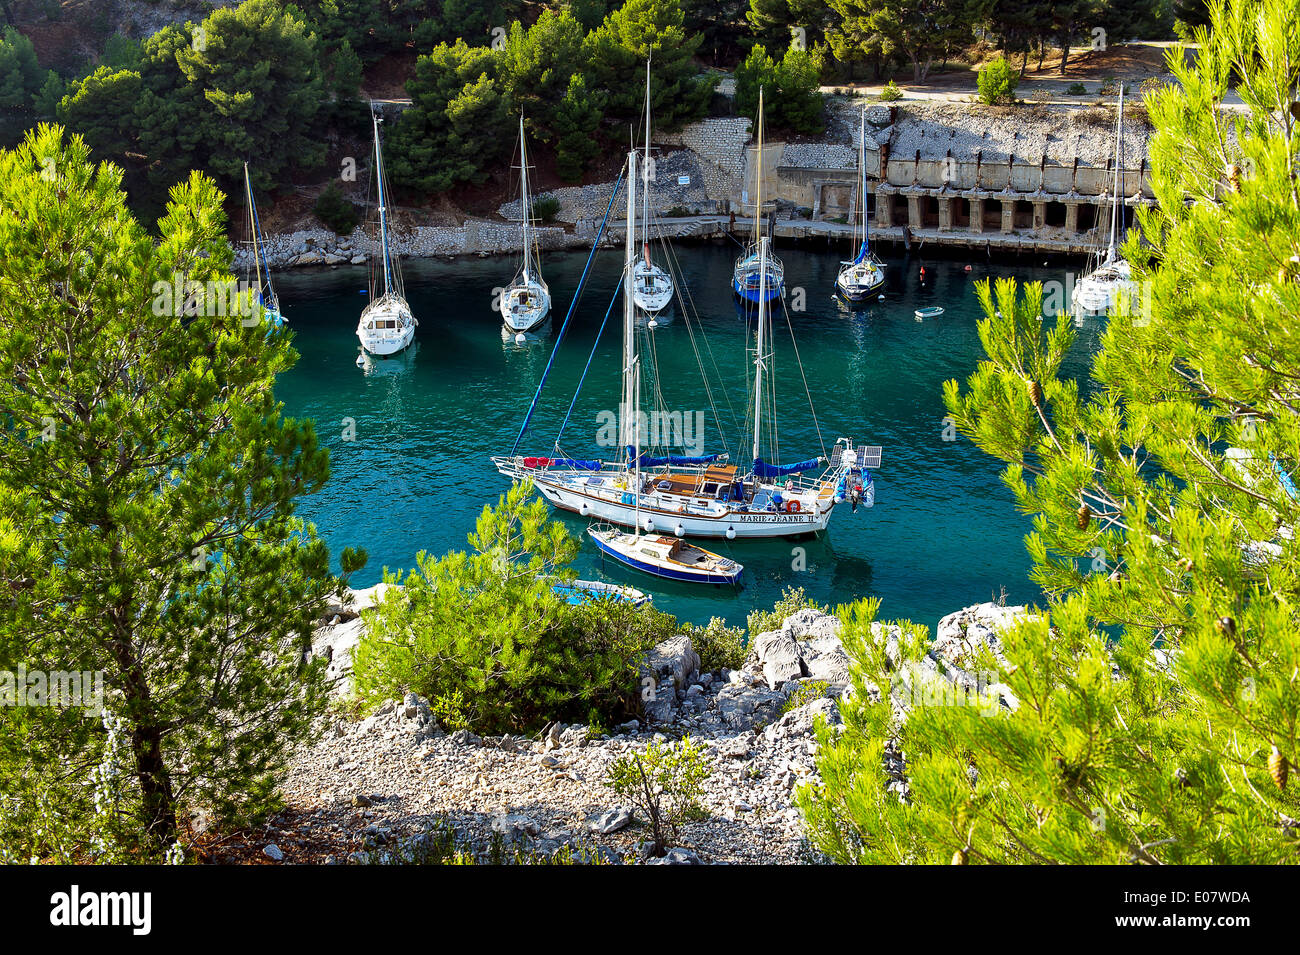 Europe, France, Bouche-du-Rhone, Cassis. Sailboats in the Calanques of Port Miou. Stock Photo